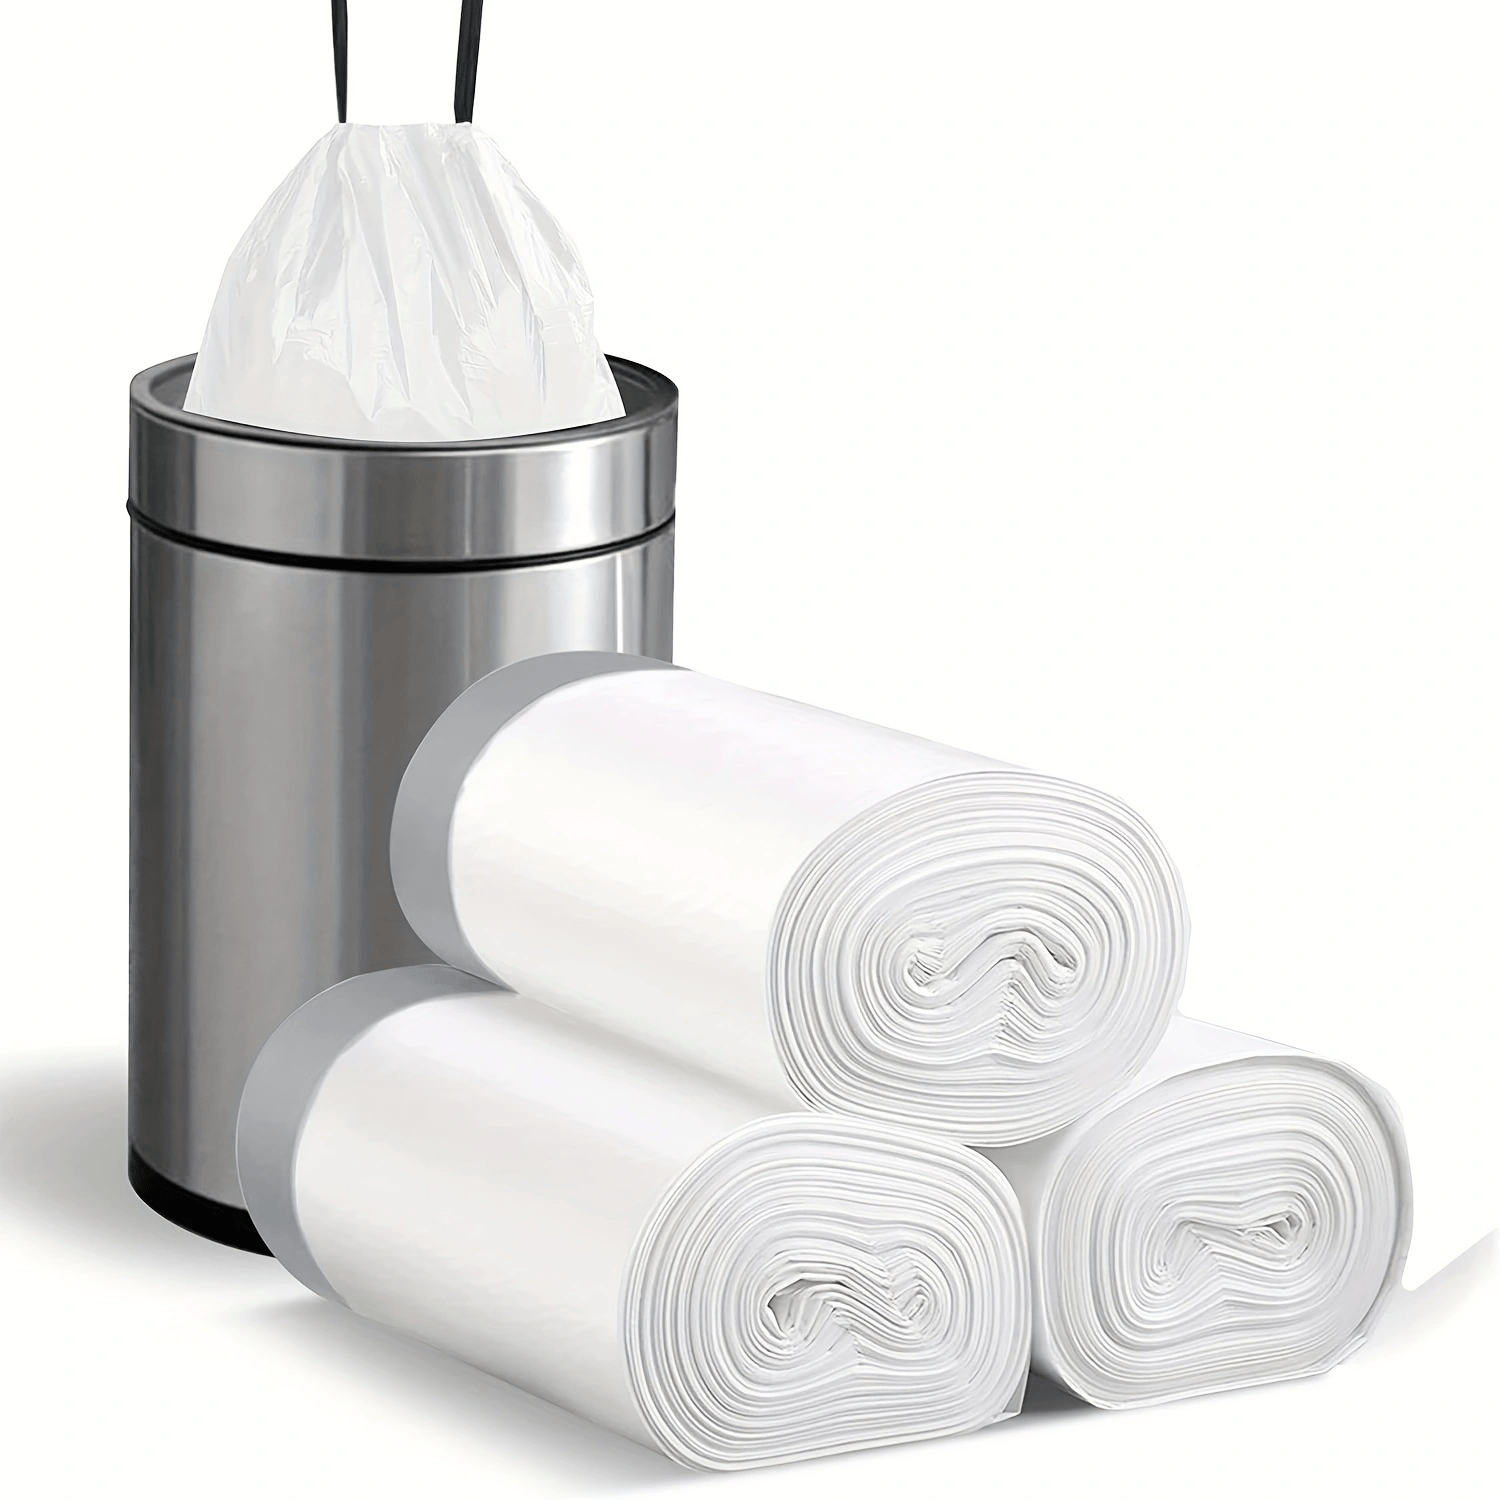 

45pcs/3rolls, Small Drawstring Trash Bags 4 Gallons, Plastic Garbage Can Trash Can Bags 15 Liters For Bathroom Restroom Bedroom Office Toilet